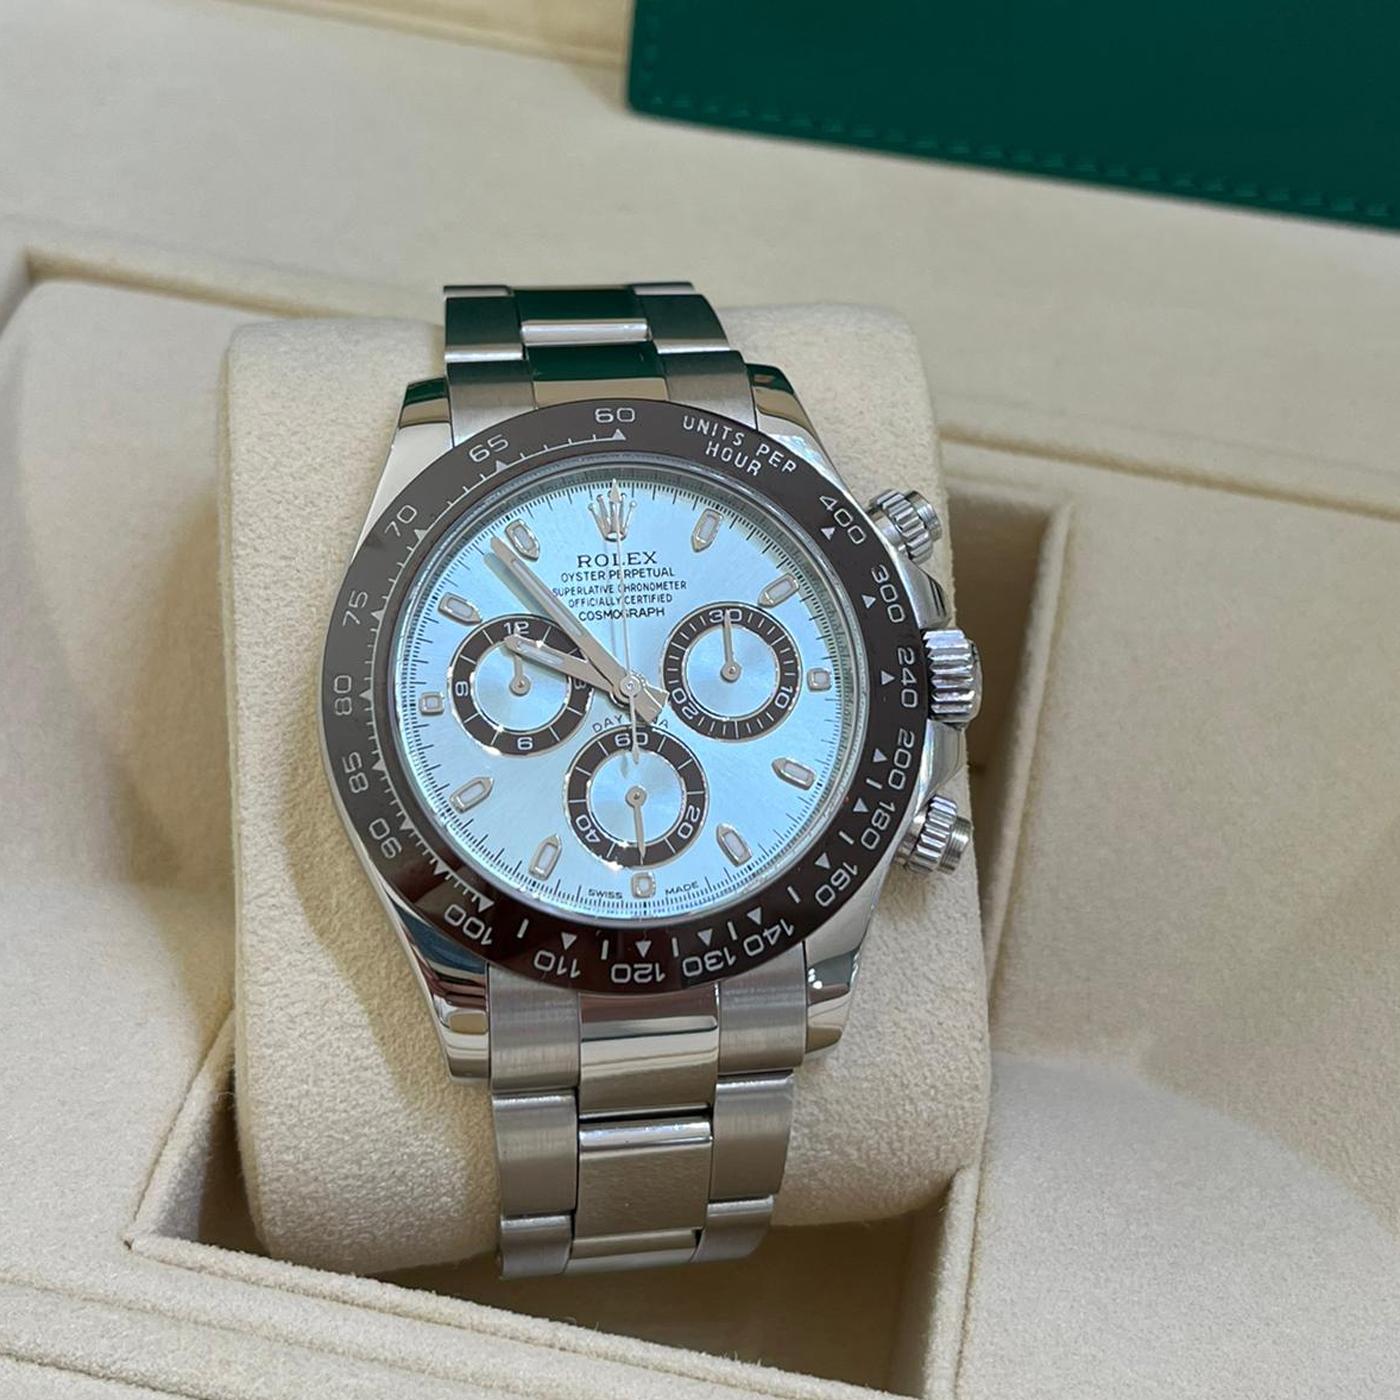 Rolex Daytona Cosmograph Oyster Perpetual Platinum Ice Blue Dial 116506 1